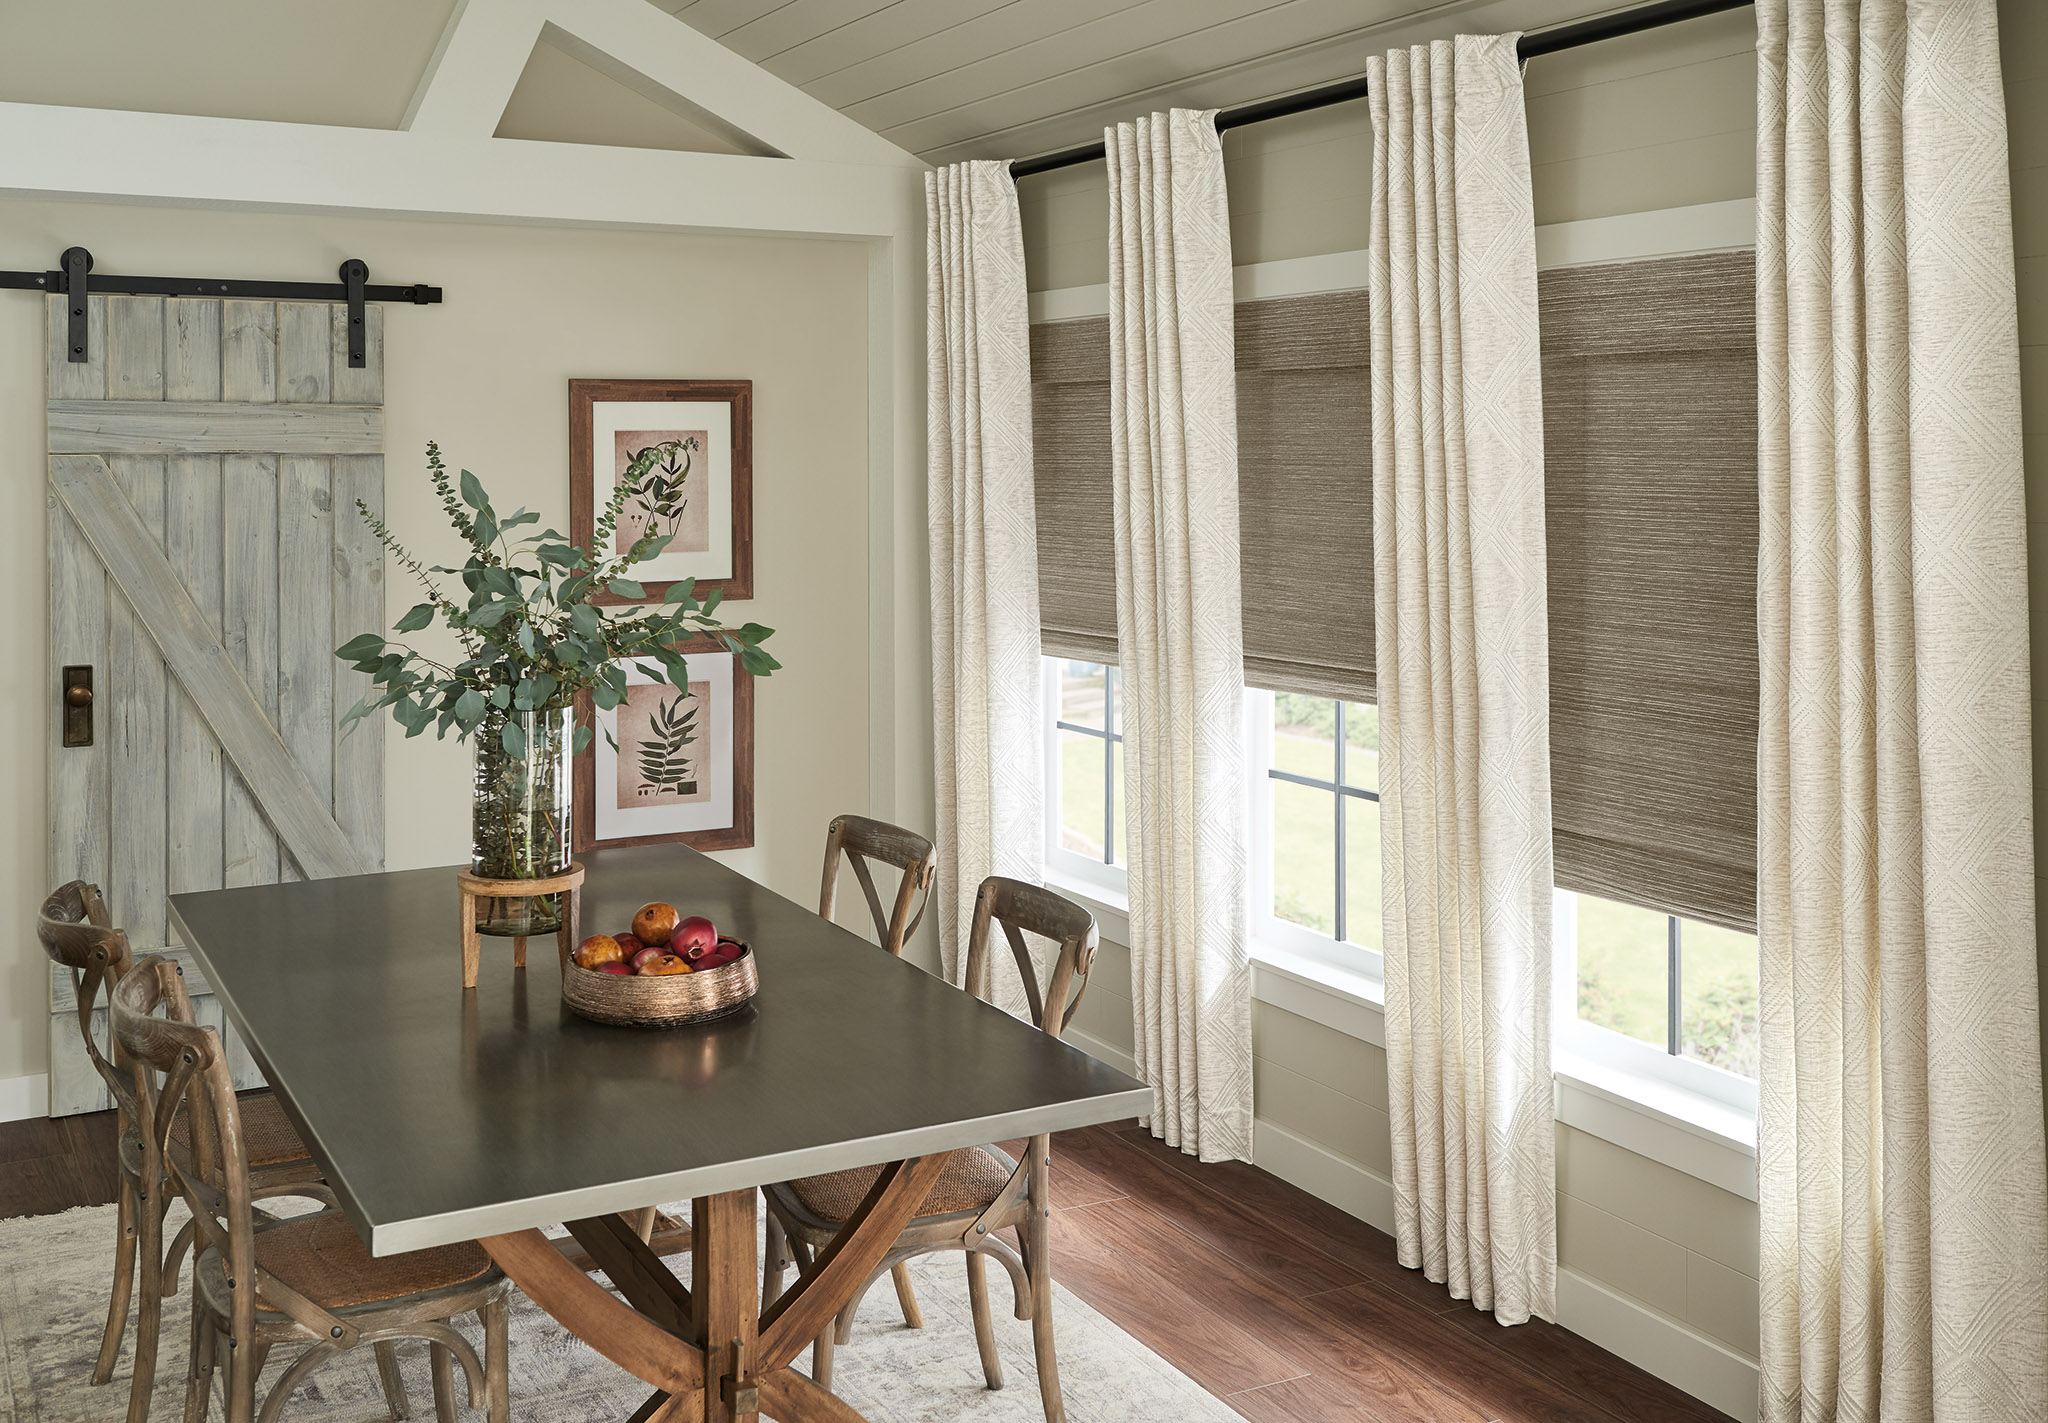 image of window treatments in dining room